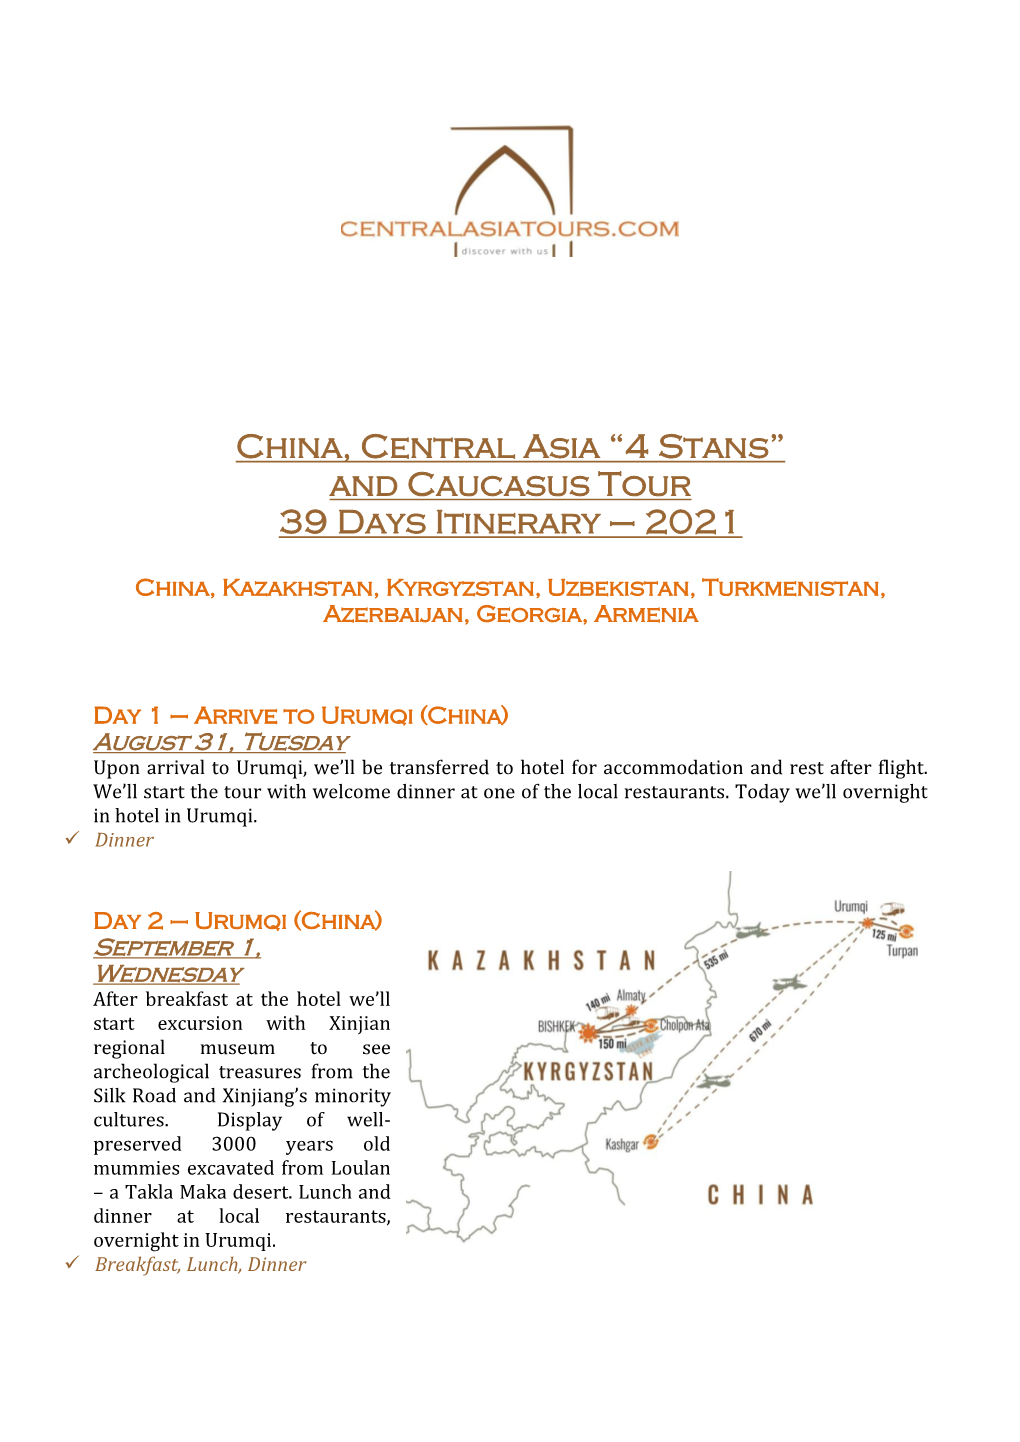 China, Central Asia “4 Stans” and Caucasus Tour 39 Days Itinerary – 2021